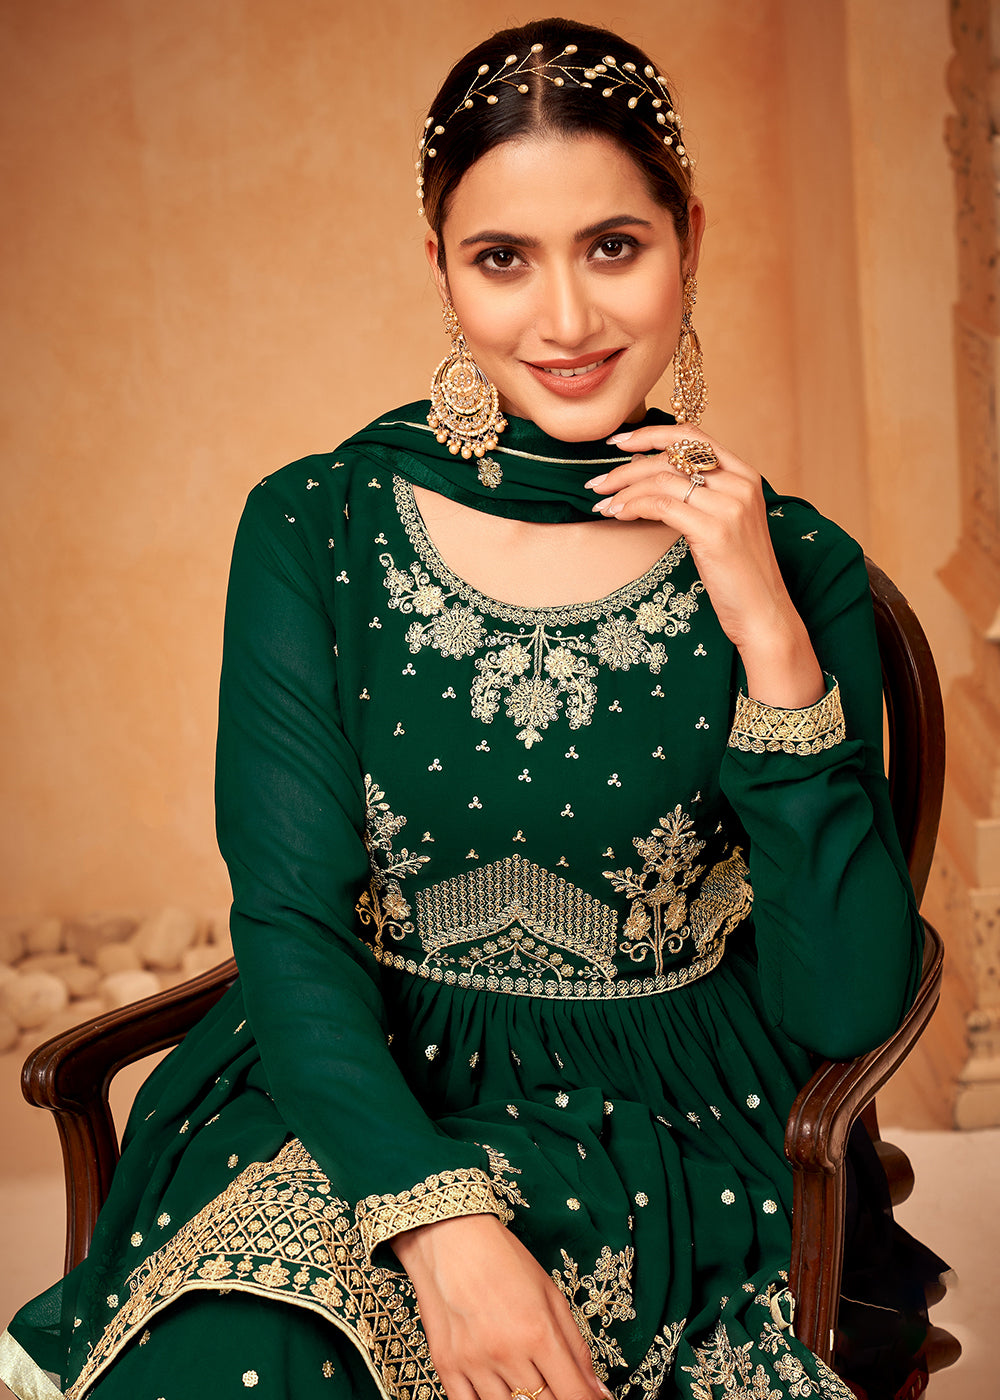 Shop Now Imperial Dark Green Embroidered Wedding Festive Gharara Suit Online at Empress Clothing in USA, UK, Canada, Germany & Worldwide.